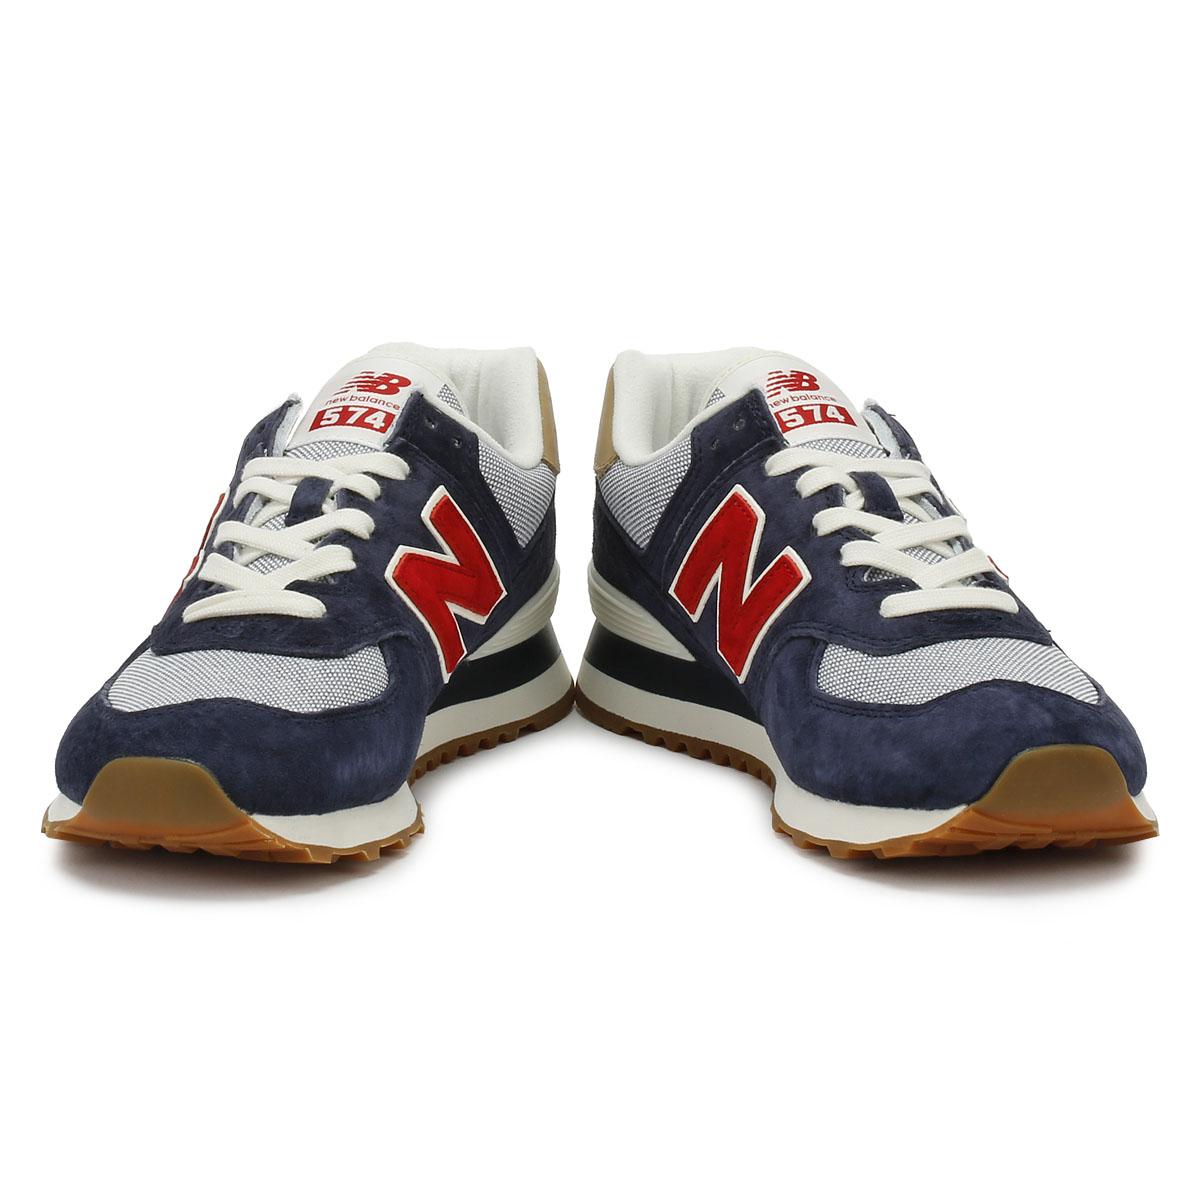 nb ml574ptr,Save up to 16%,www.innovationbusiness.net